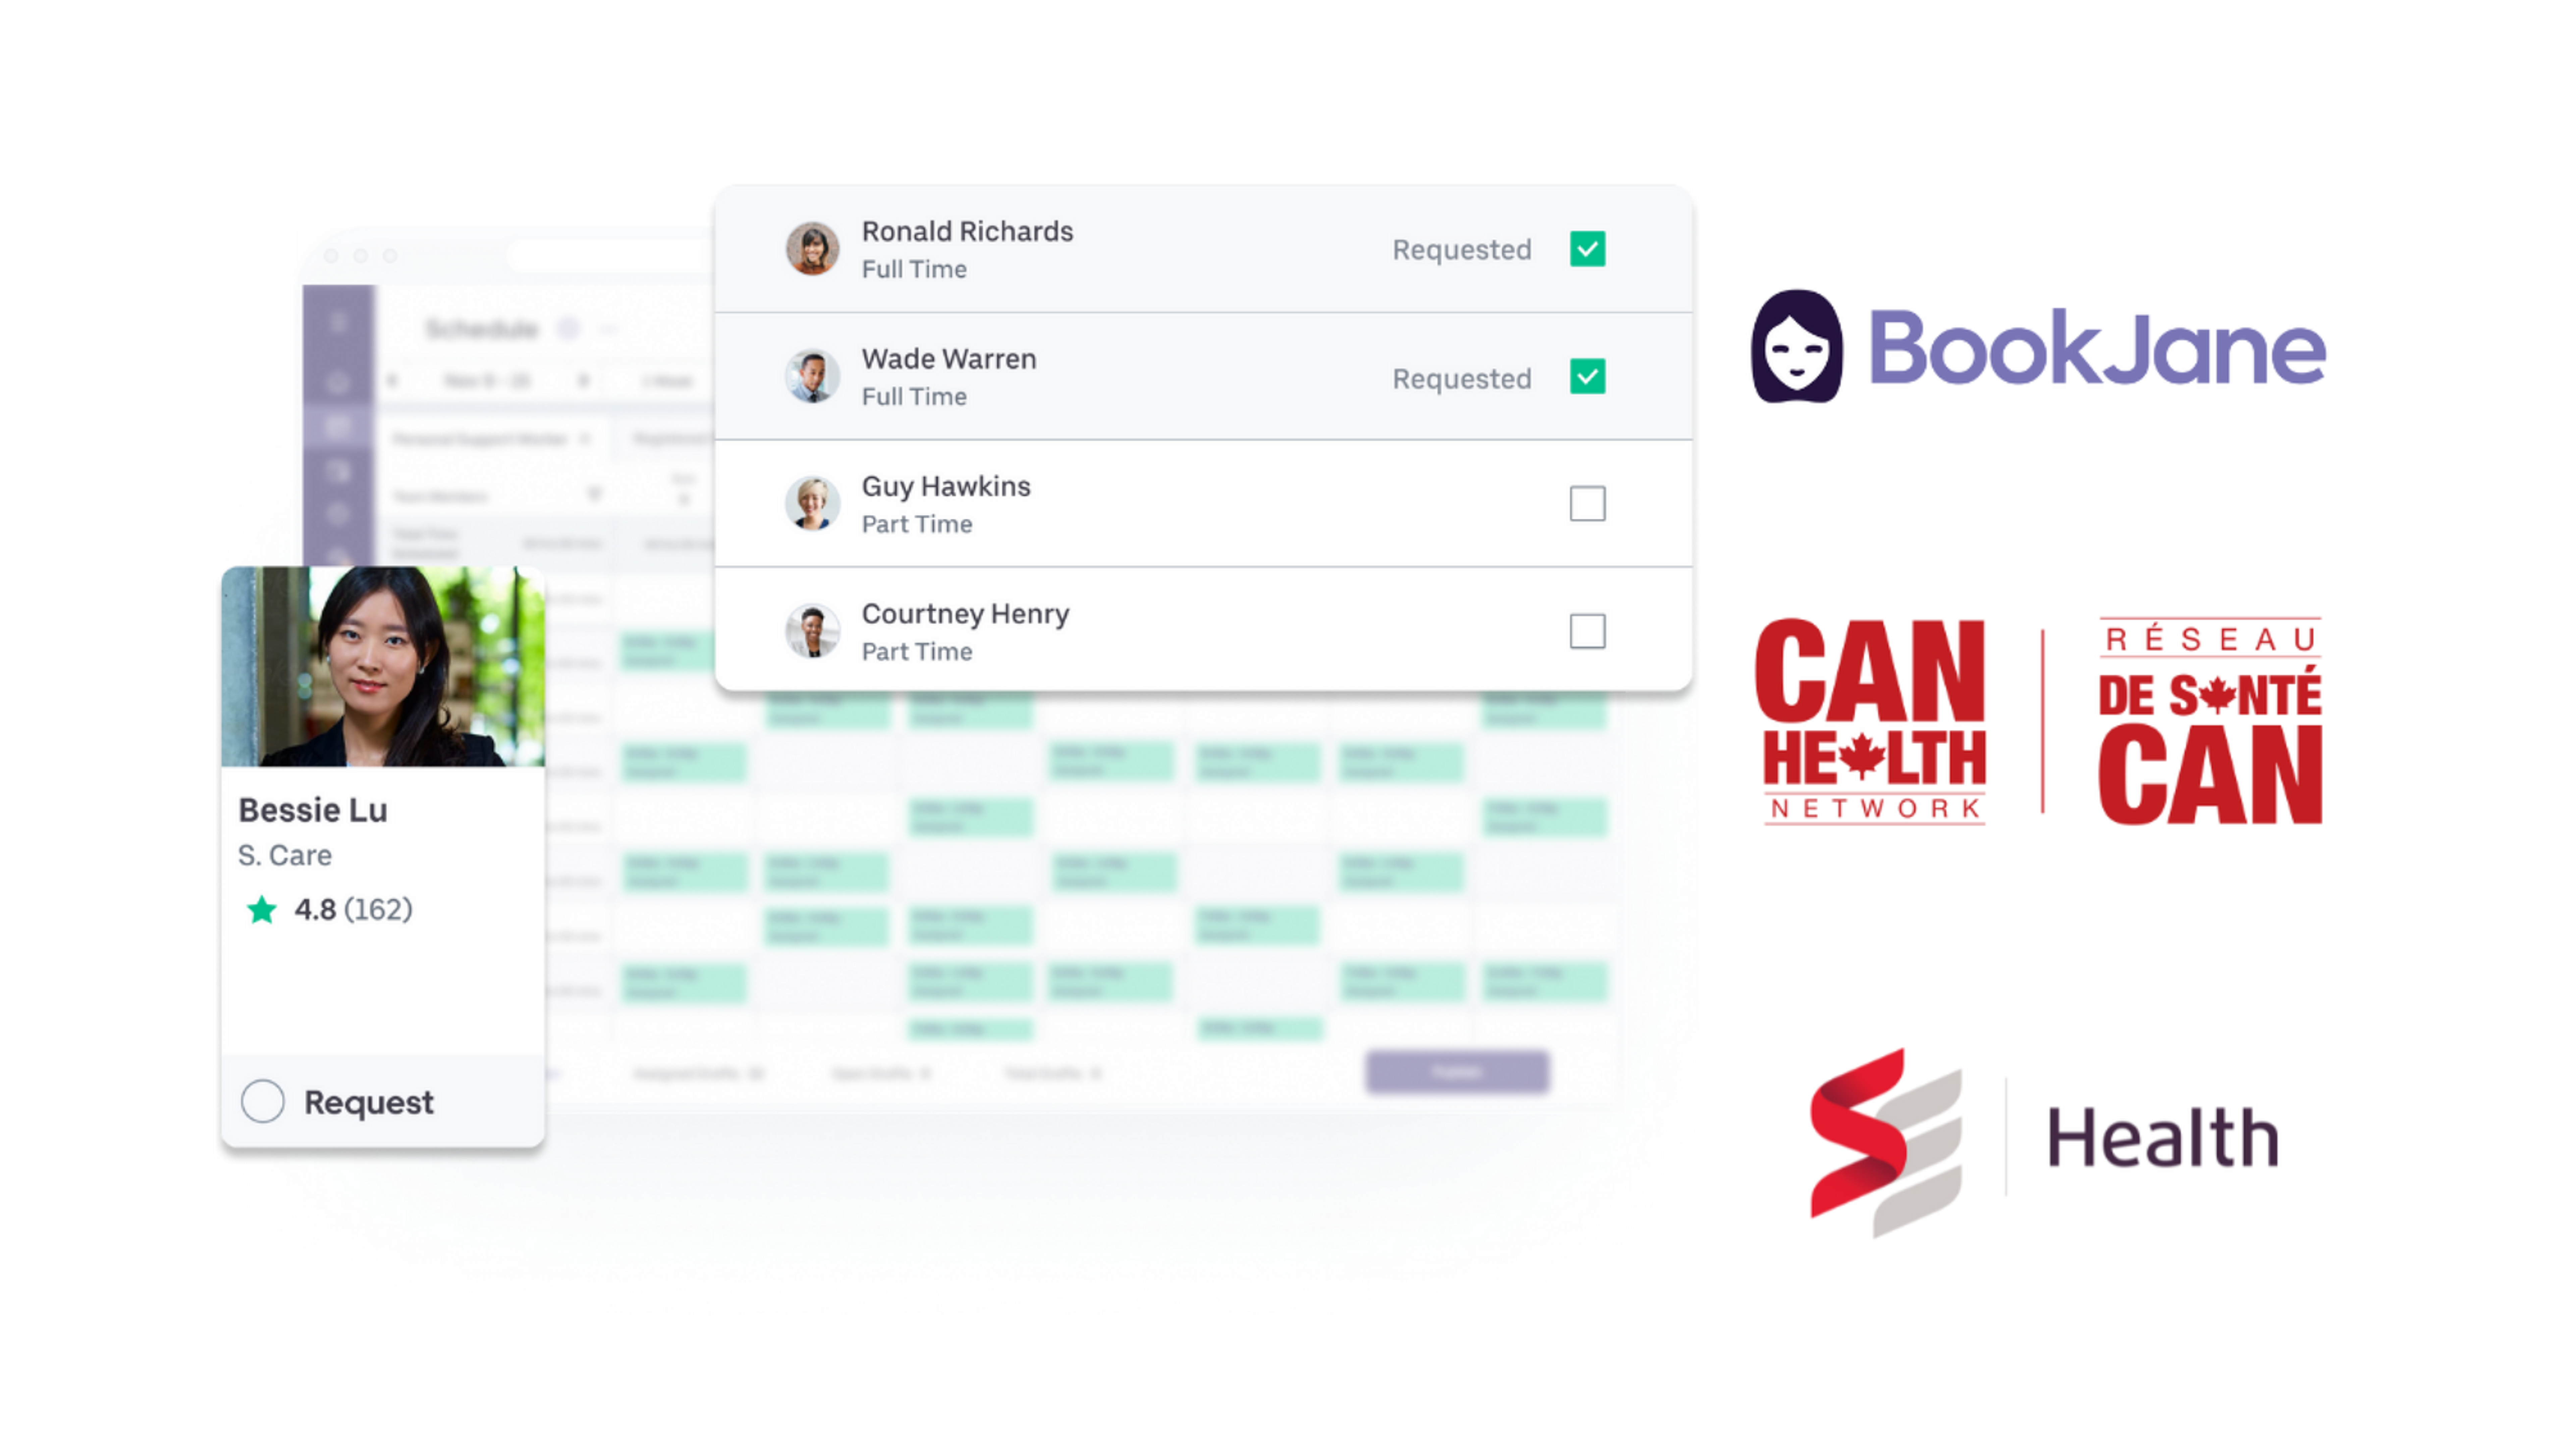 Image of CAN Health, SE Health and BookJane partnership